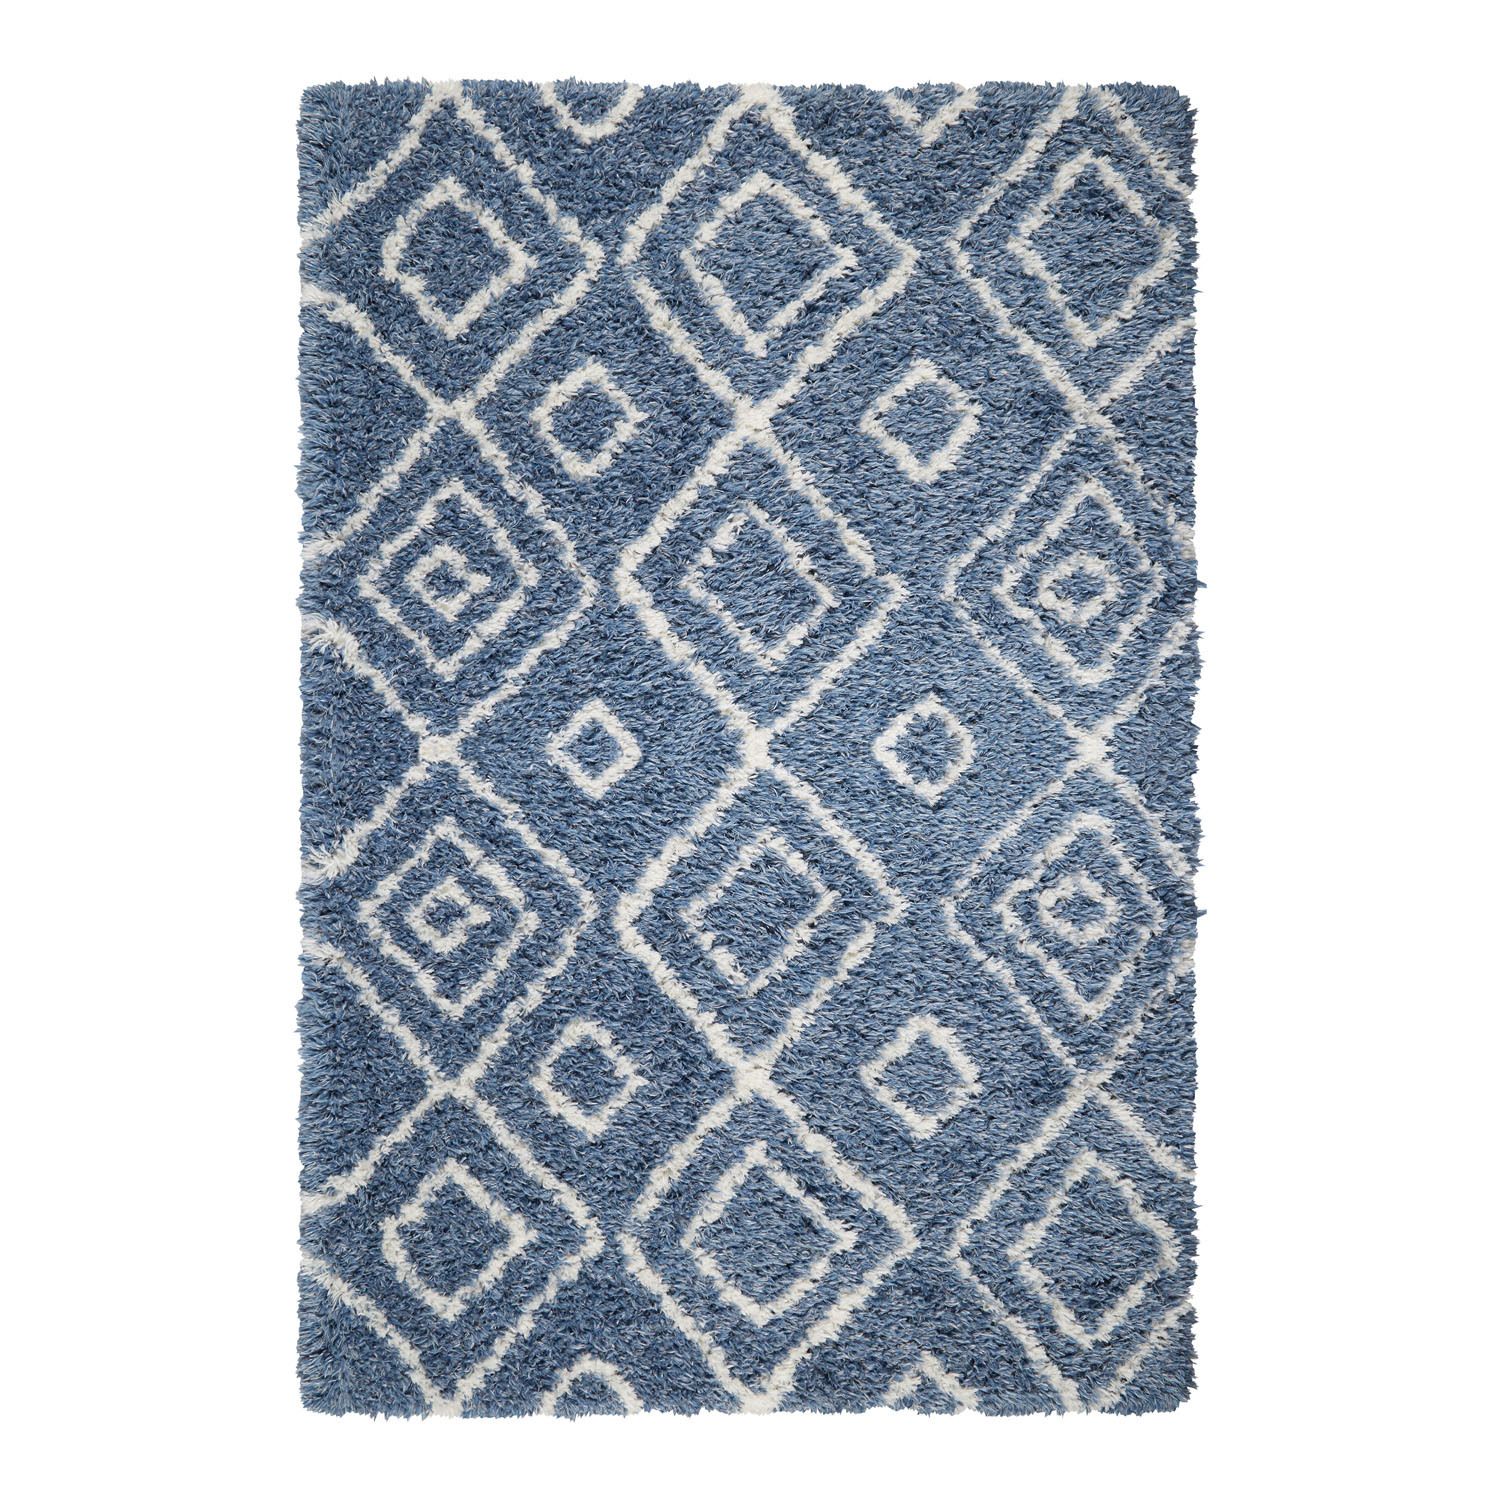 Image for Laura Hill Cambridge Brooks Area Rug at Kohl's.